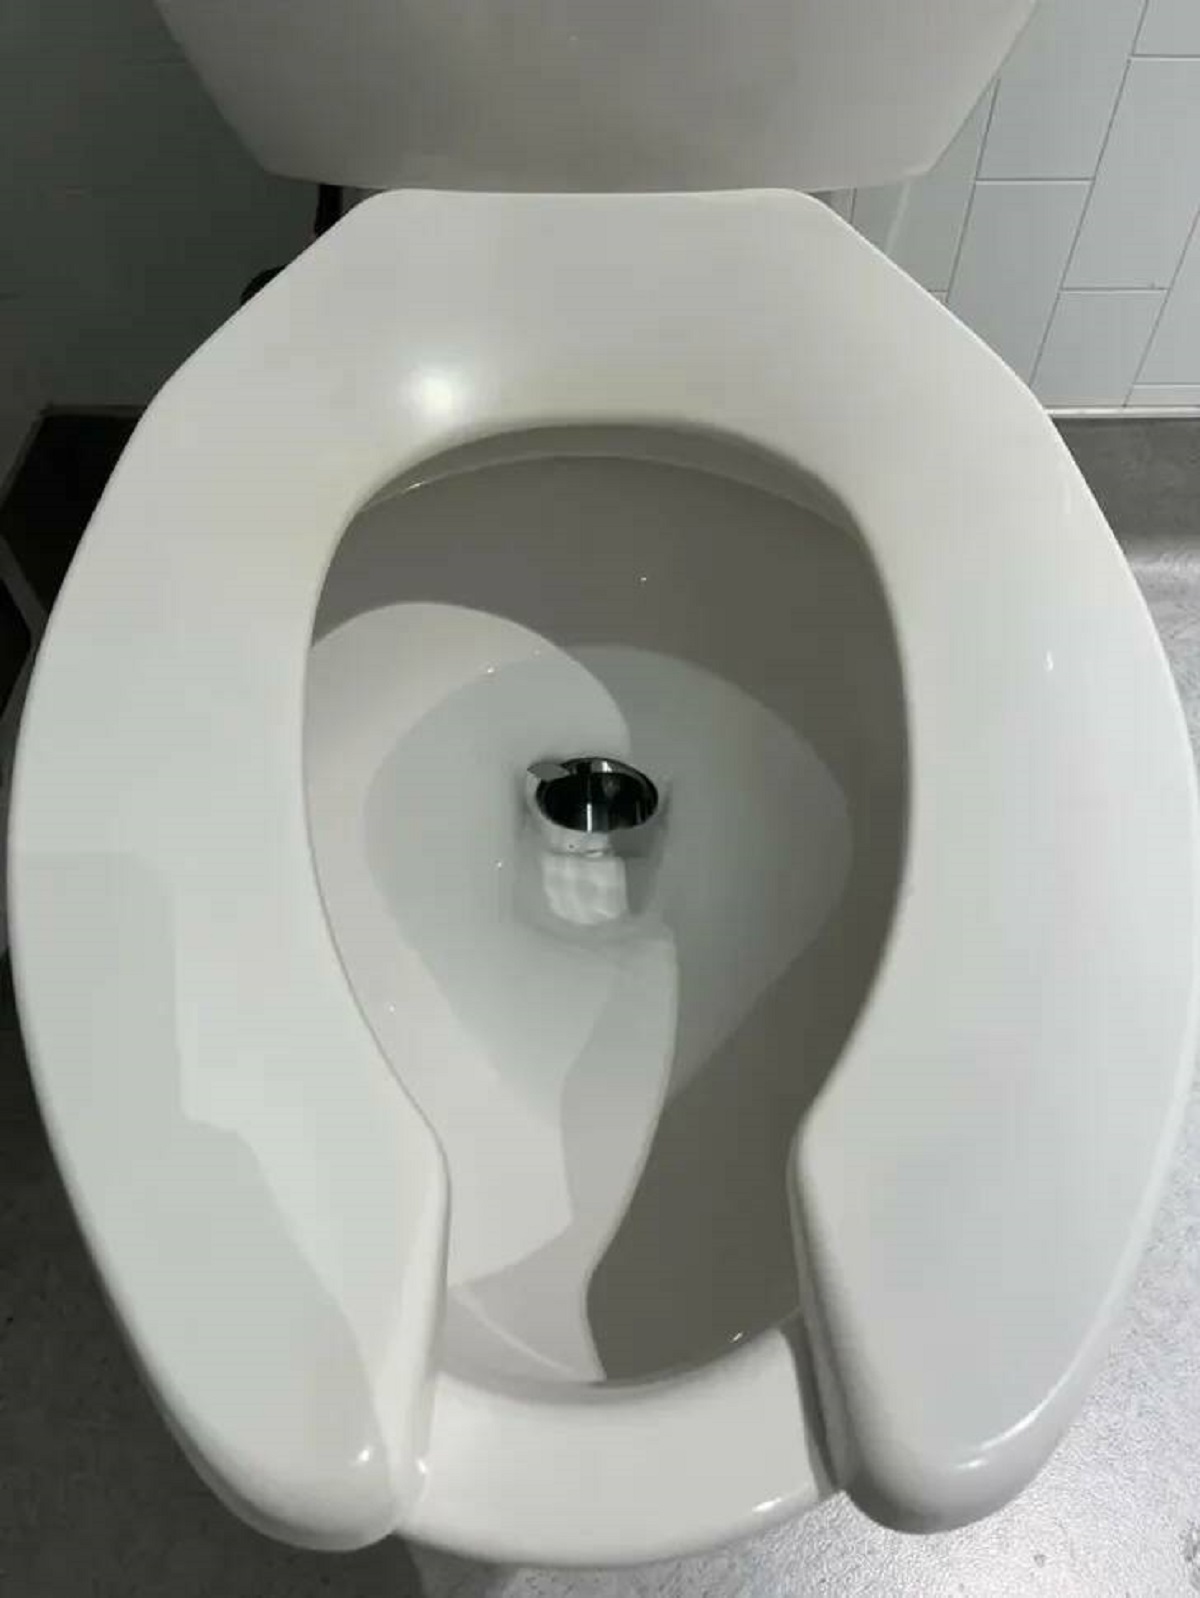 “The toilet in my doctor’s office has a metal tube at the bottom.”